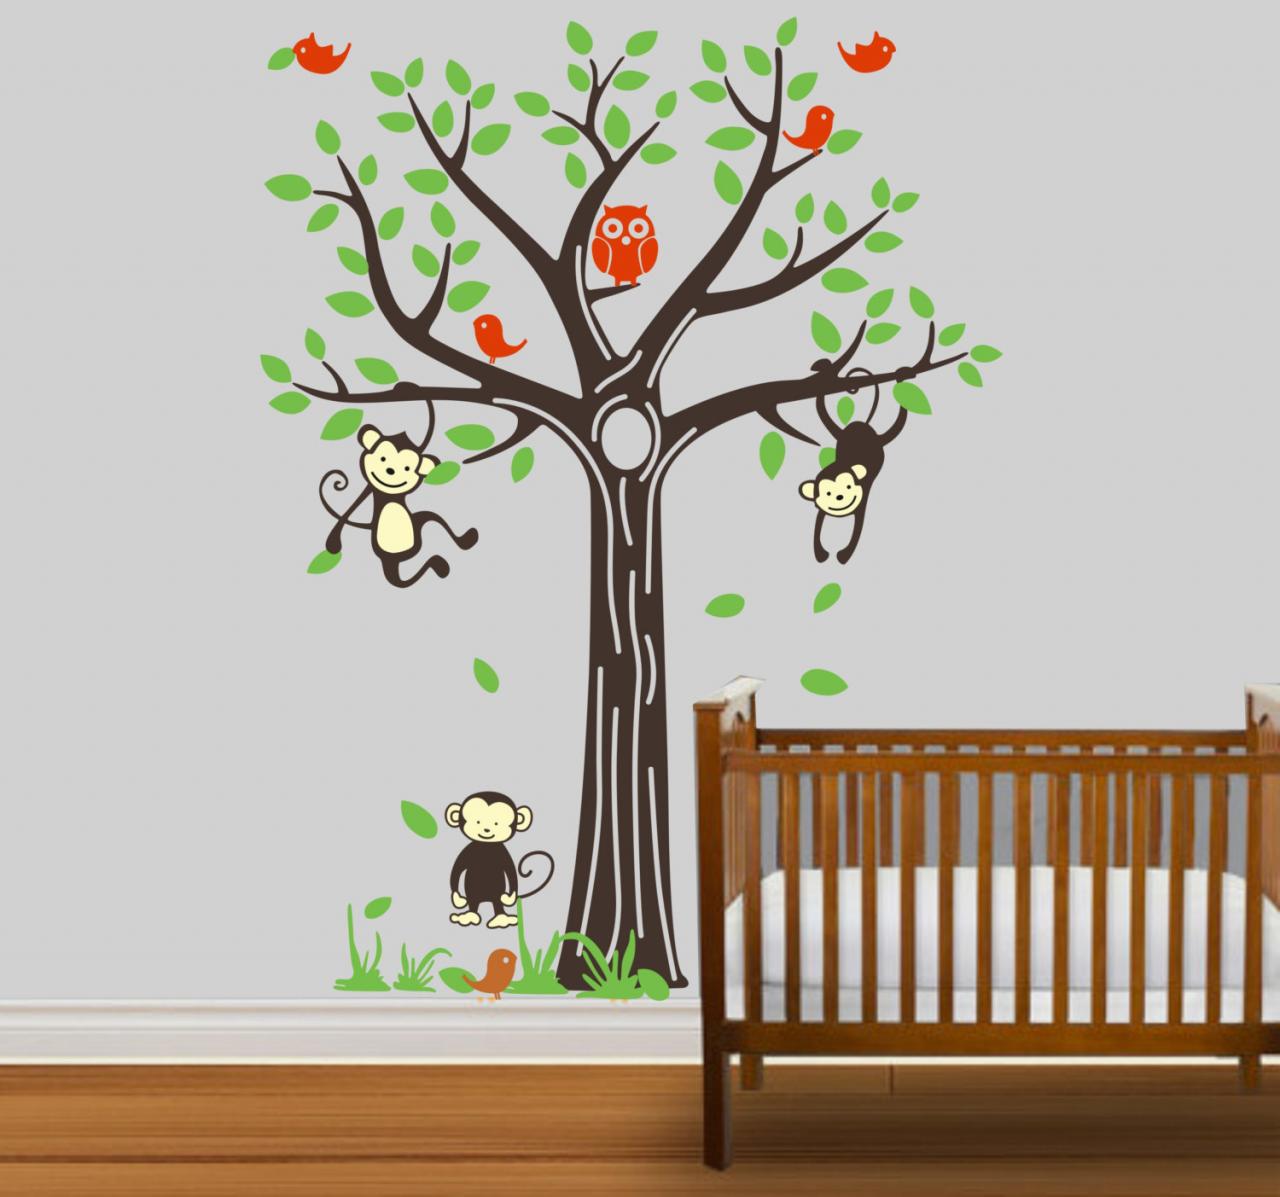 Vinyl Wall Decal Cute Playing Monkeys Tree With Birds Owl Owls Art Home Decals Wall Sticker Stickers Living Room Bed Baby Removable R826